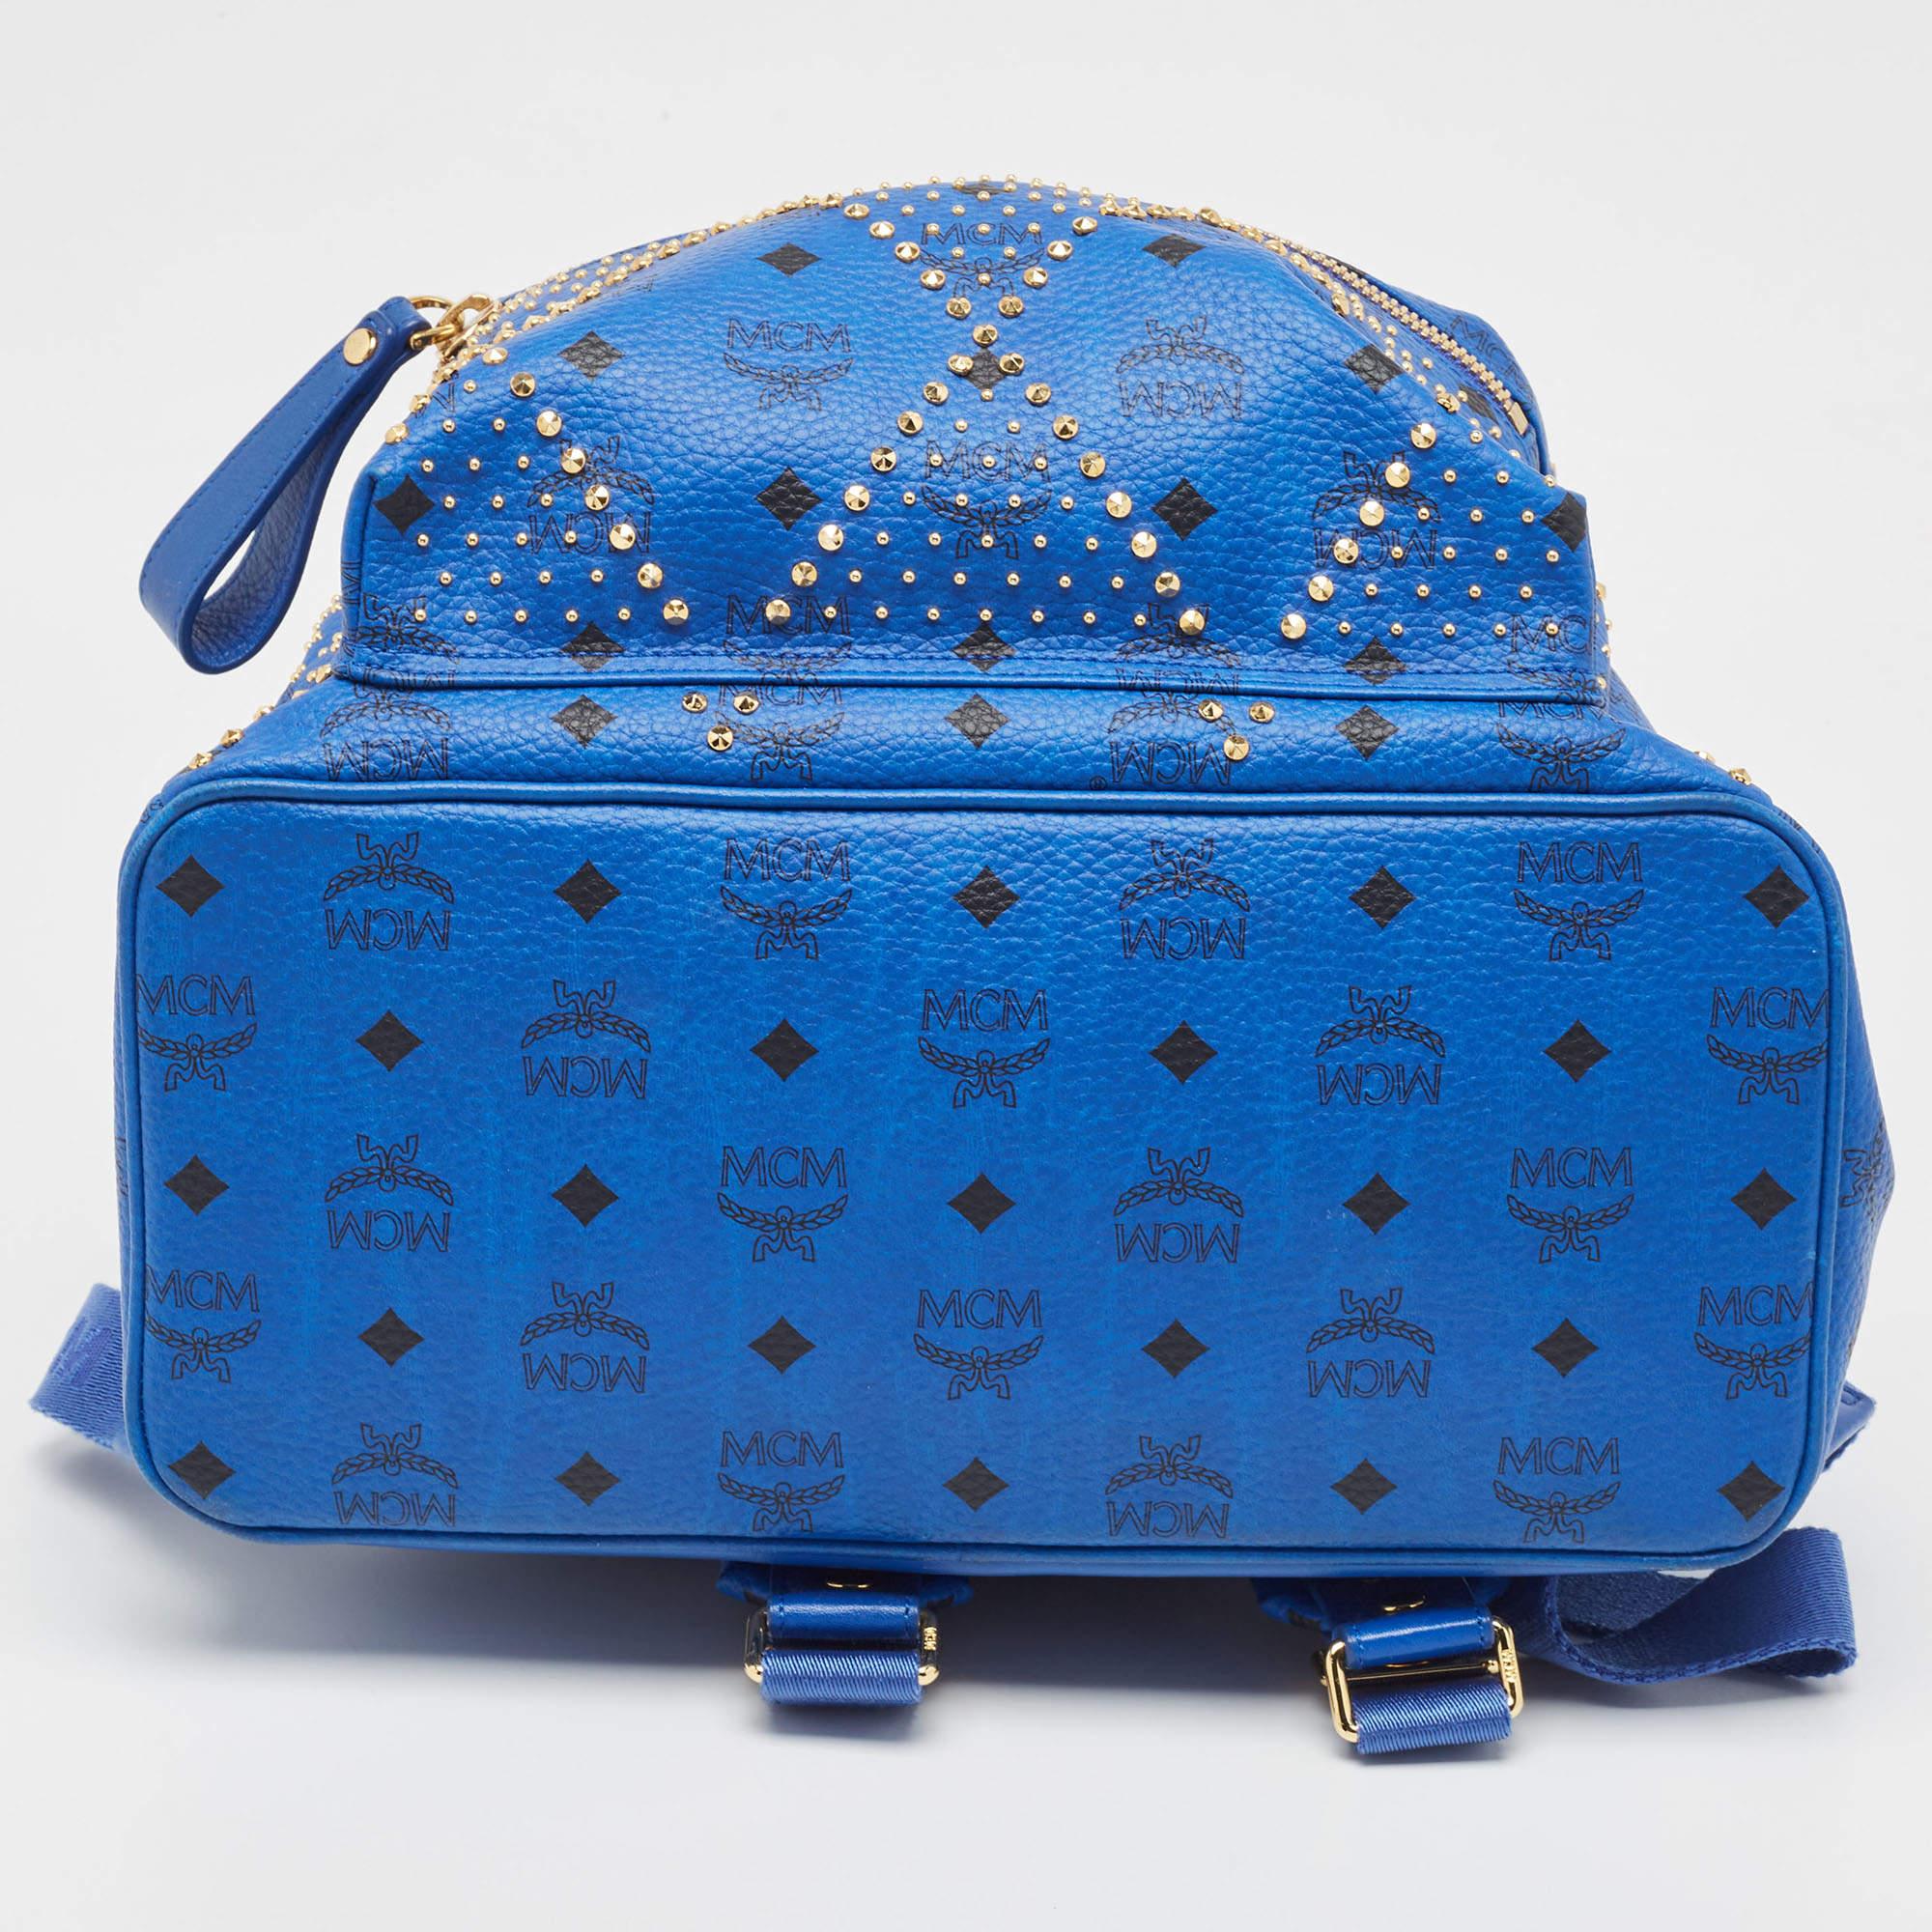 MCM Blue Visetos Leather Large Studded Stark Backpack In Excellent Condition For Sale In Dubai, Al Qouz 2